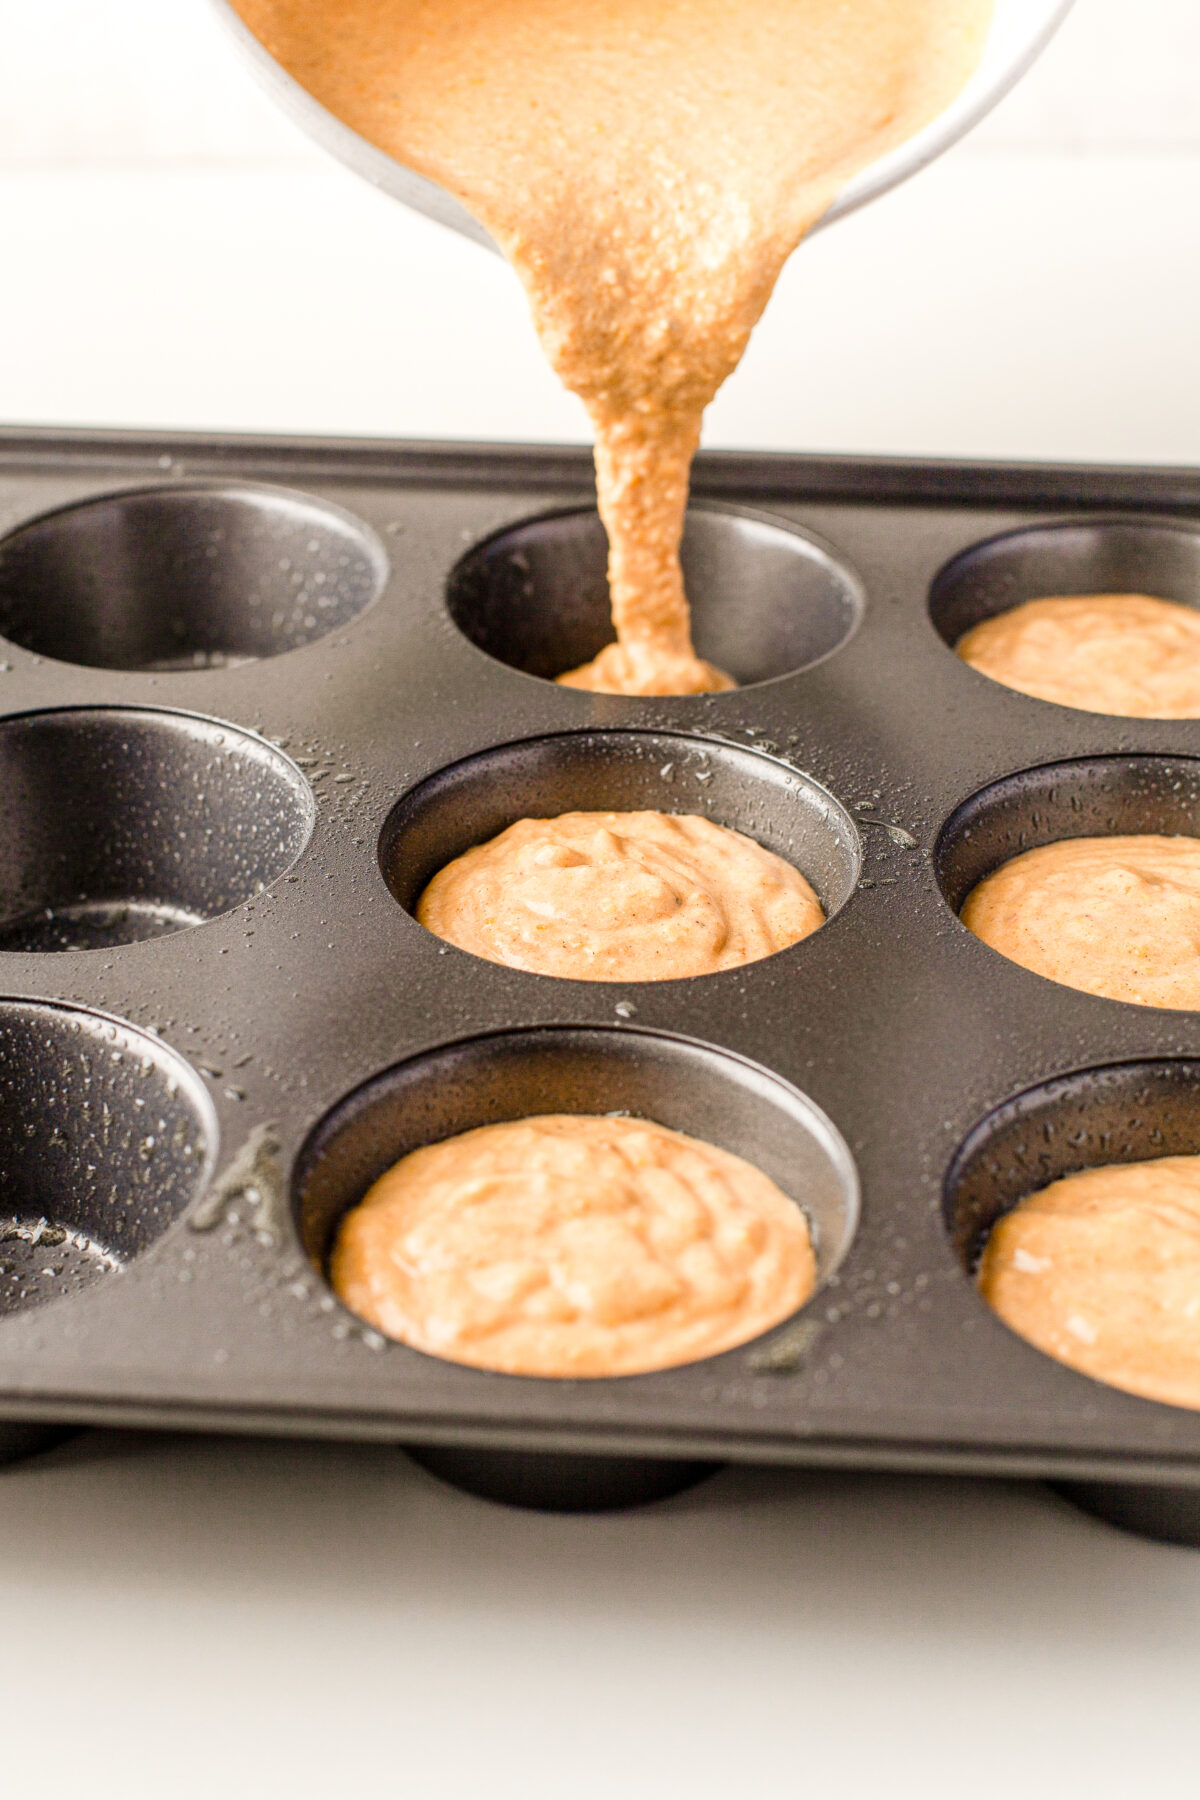 Filling the muffin tin with the batter.